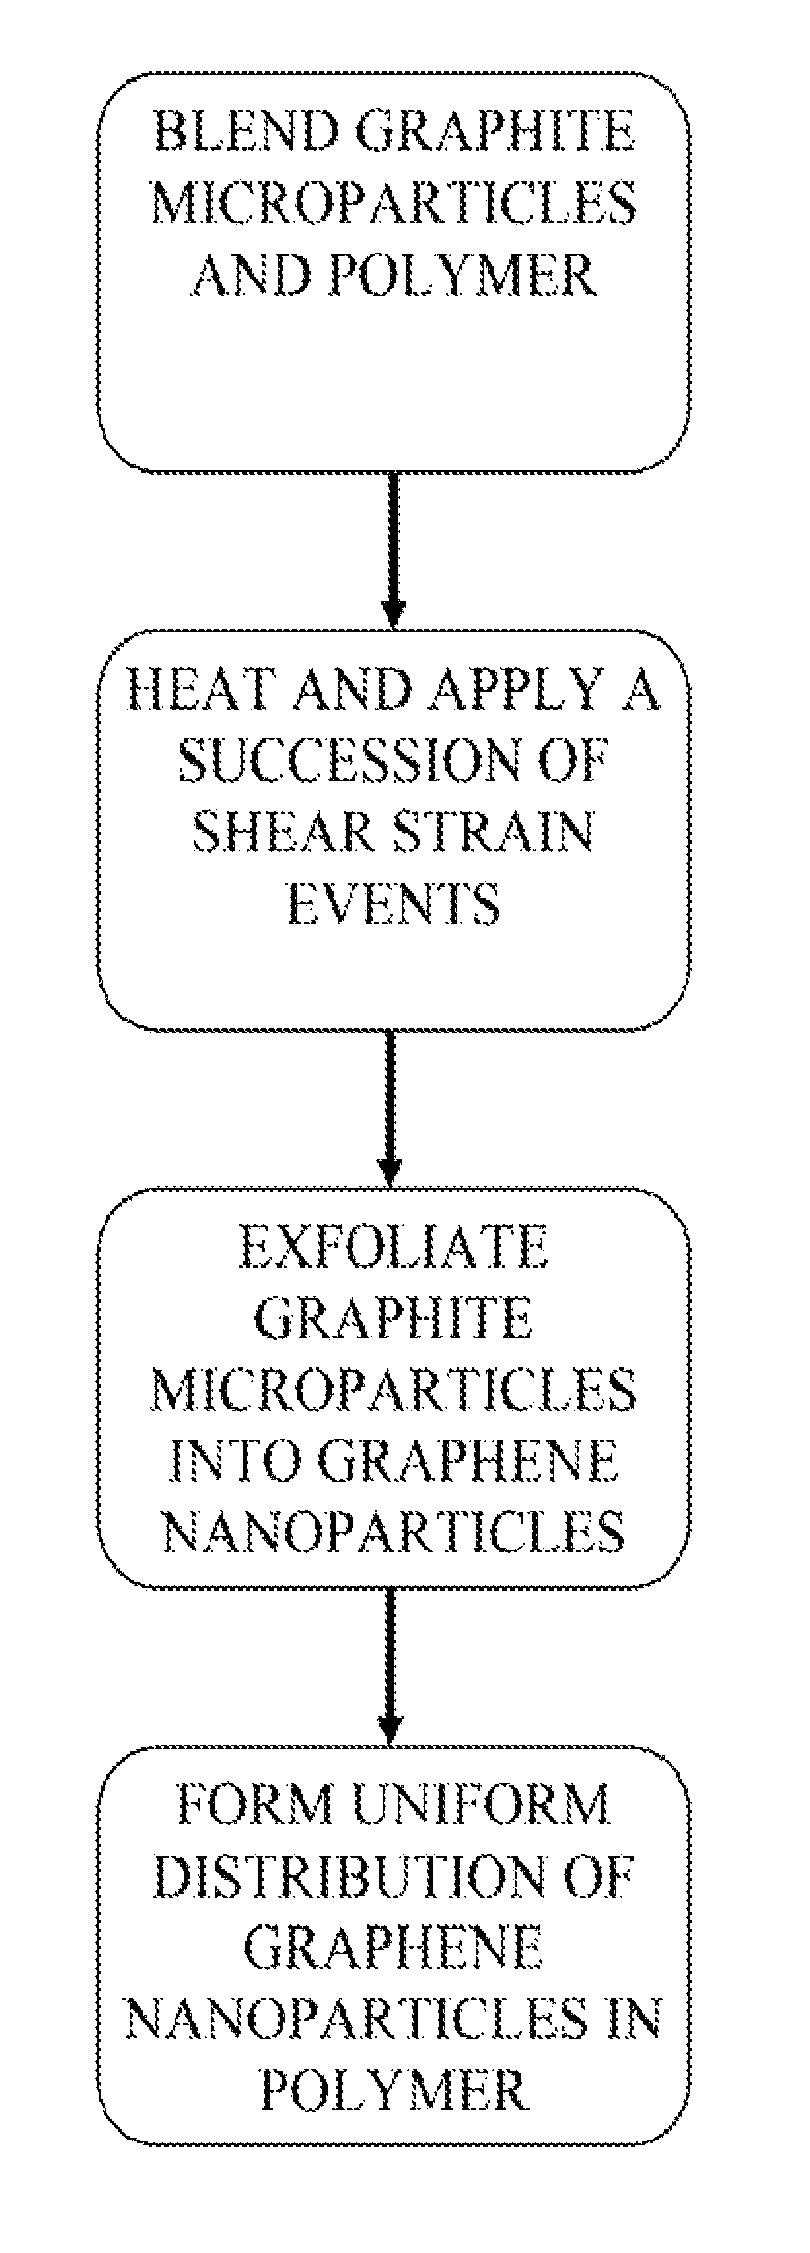 In situ exfoliation method to fabricate a graphene-reinforced polymer matrix composite (G-PMC)